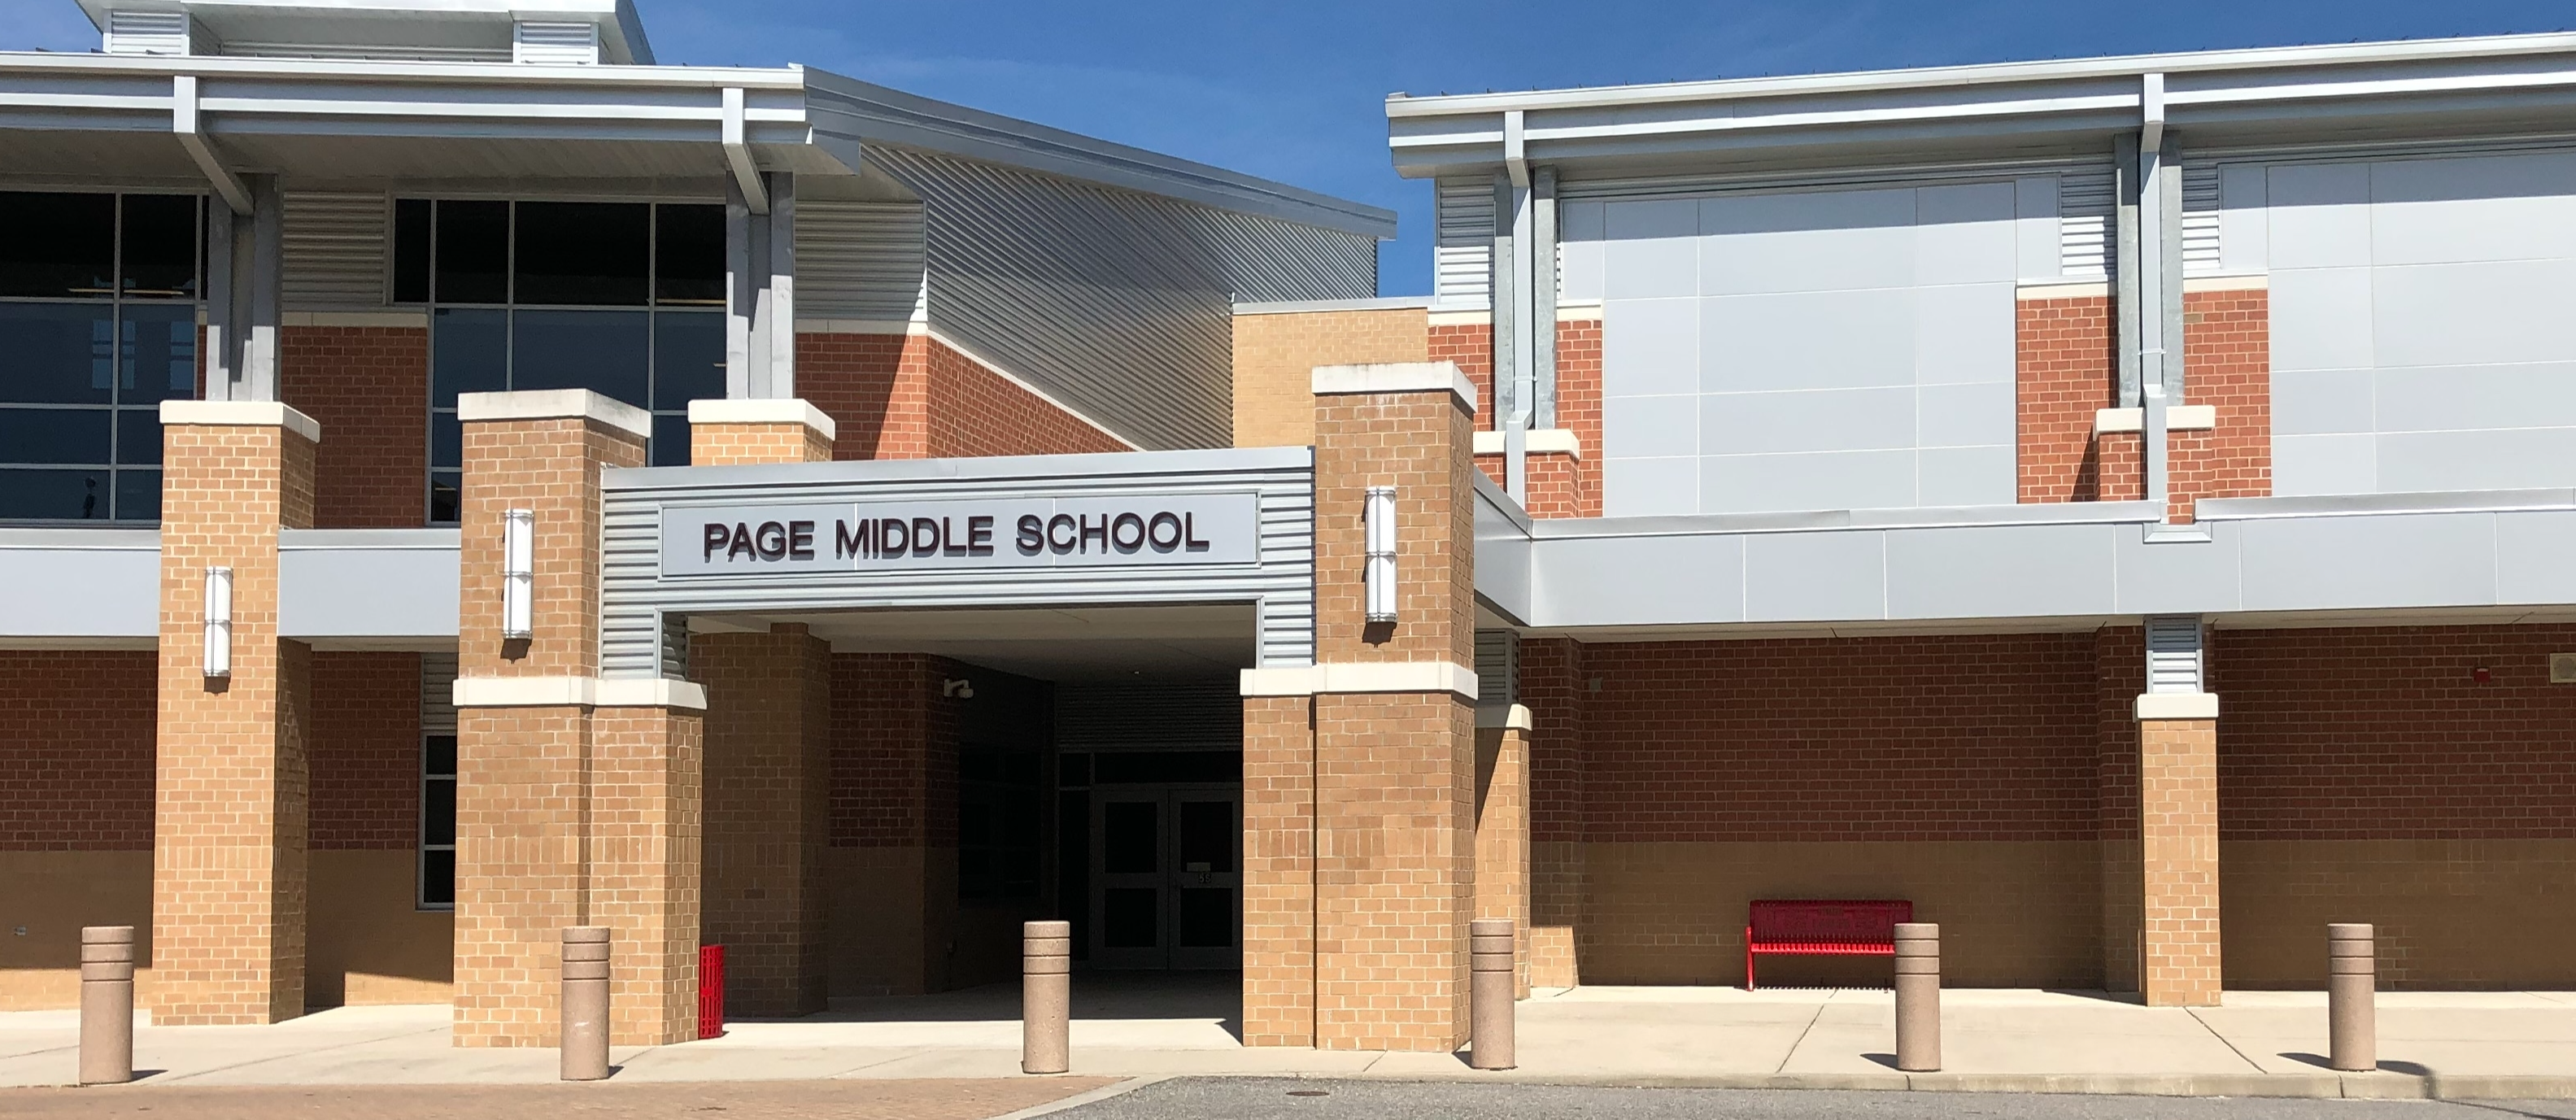 Page Middle School Entrance 